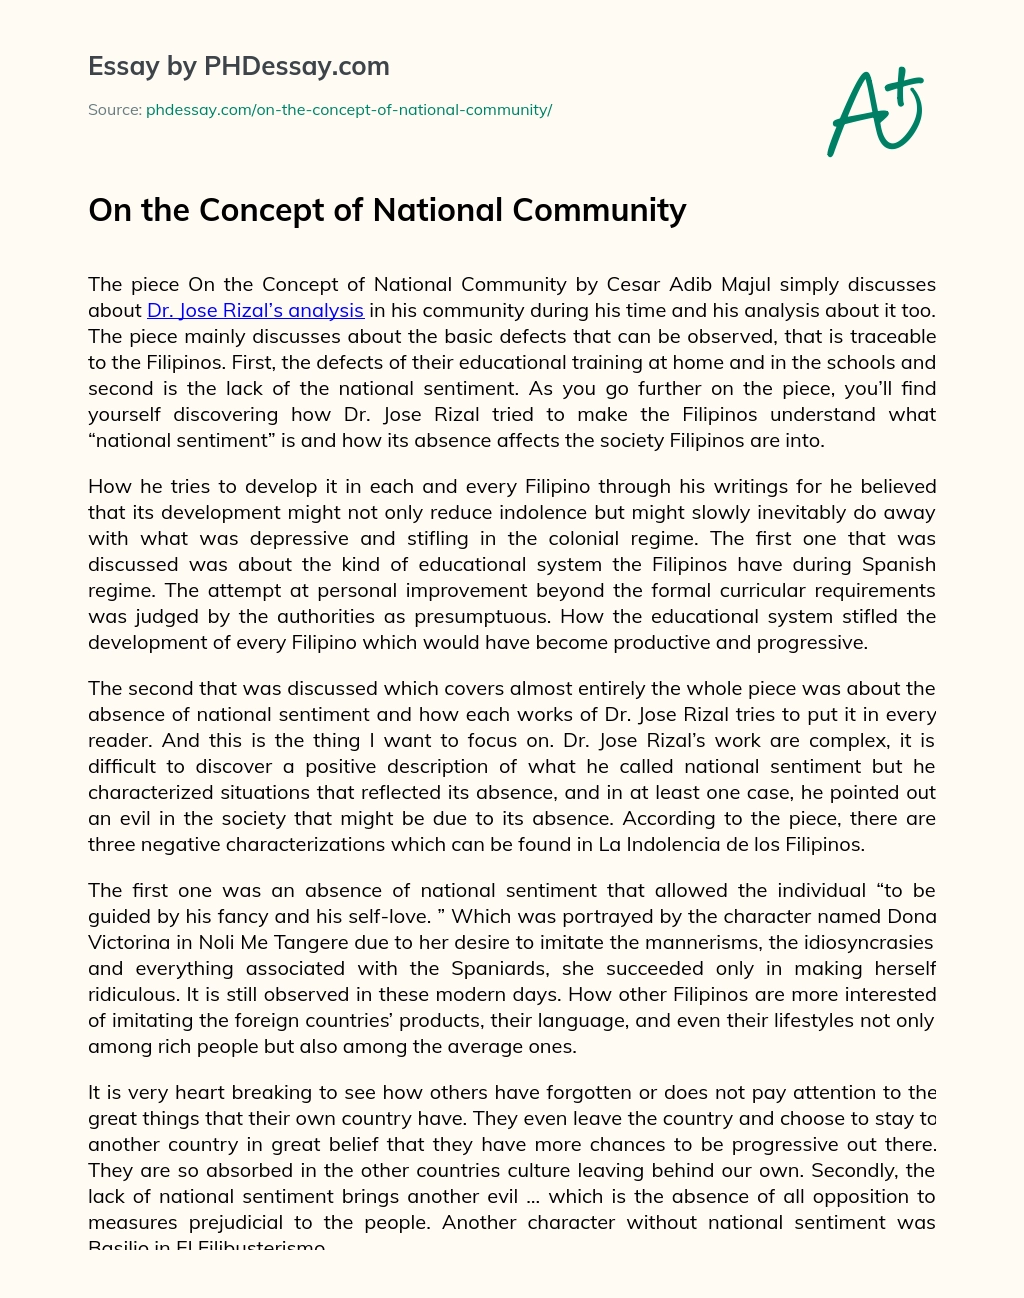 On the Concept of National Community essay